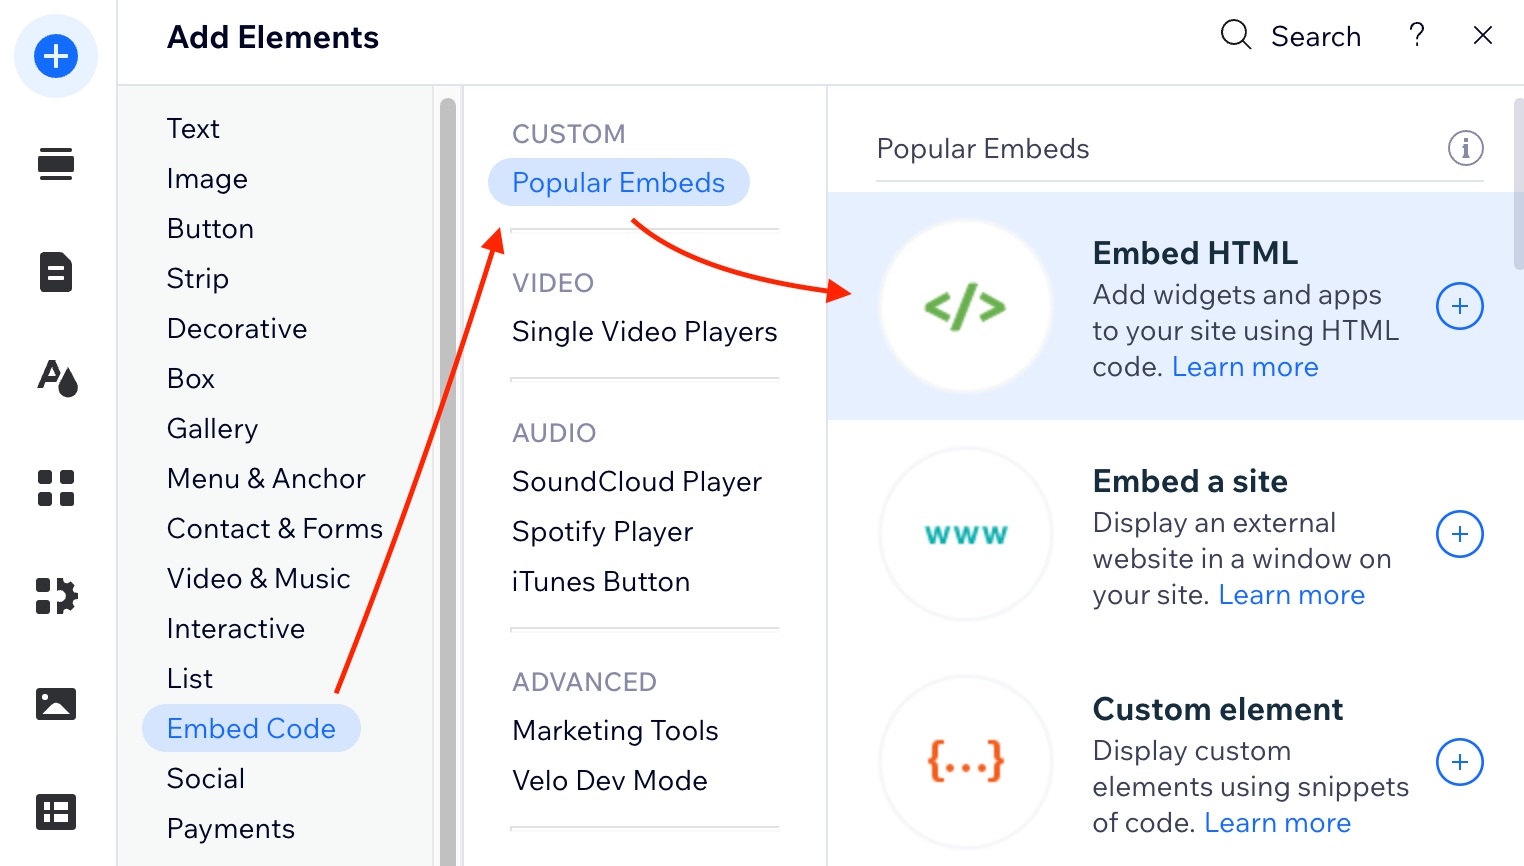 Select Embed code > Popular embeds > Embed HTML